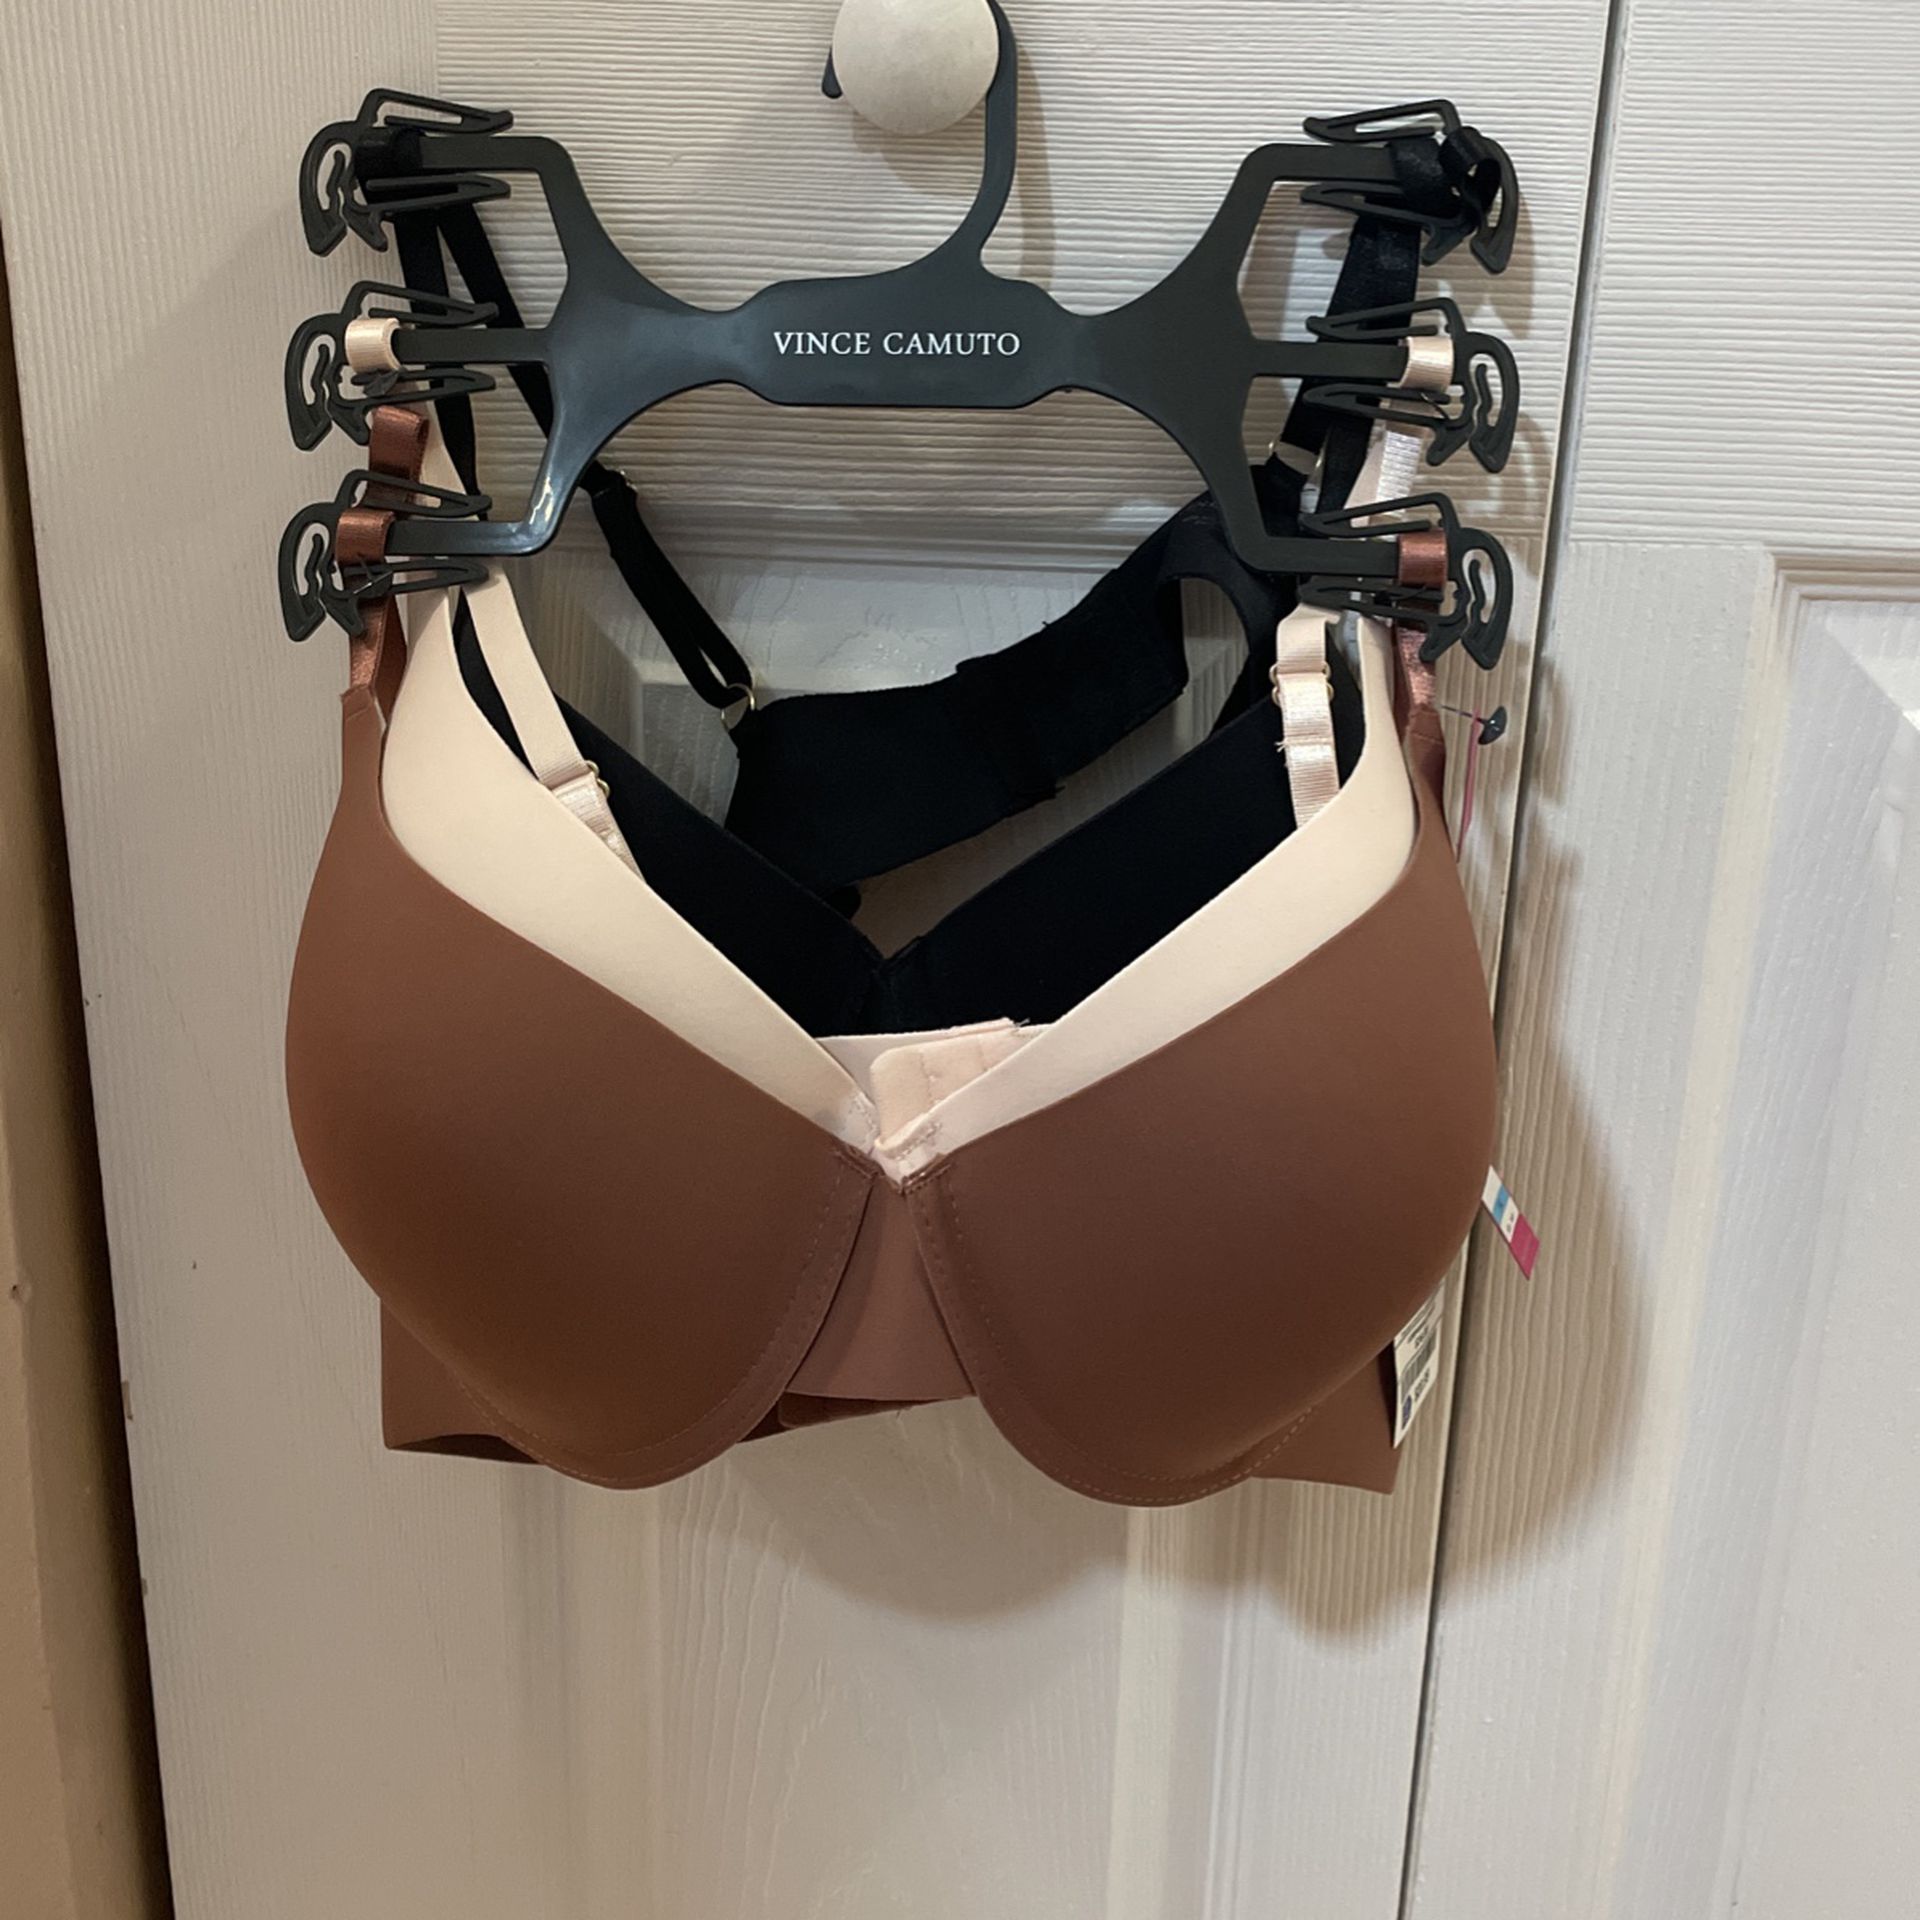 Vince Camuto for Sale in Miami, FL - OfferUp